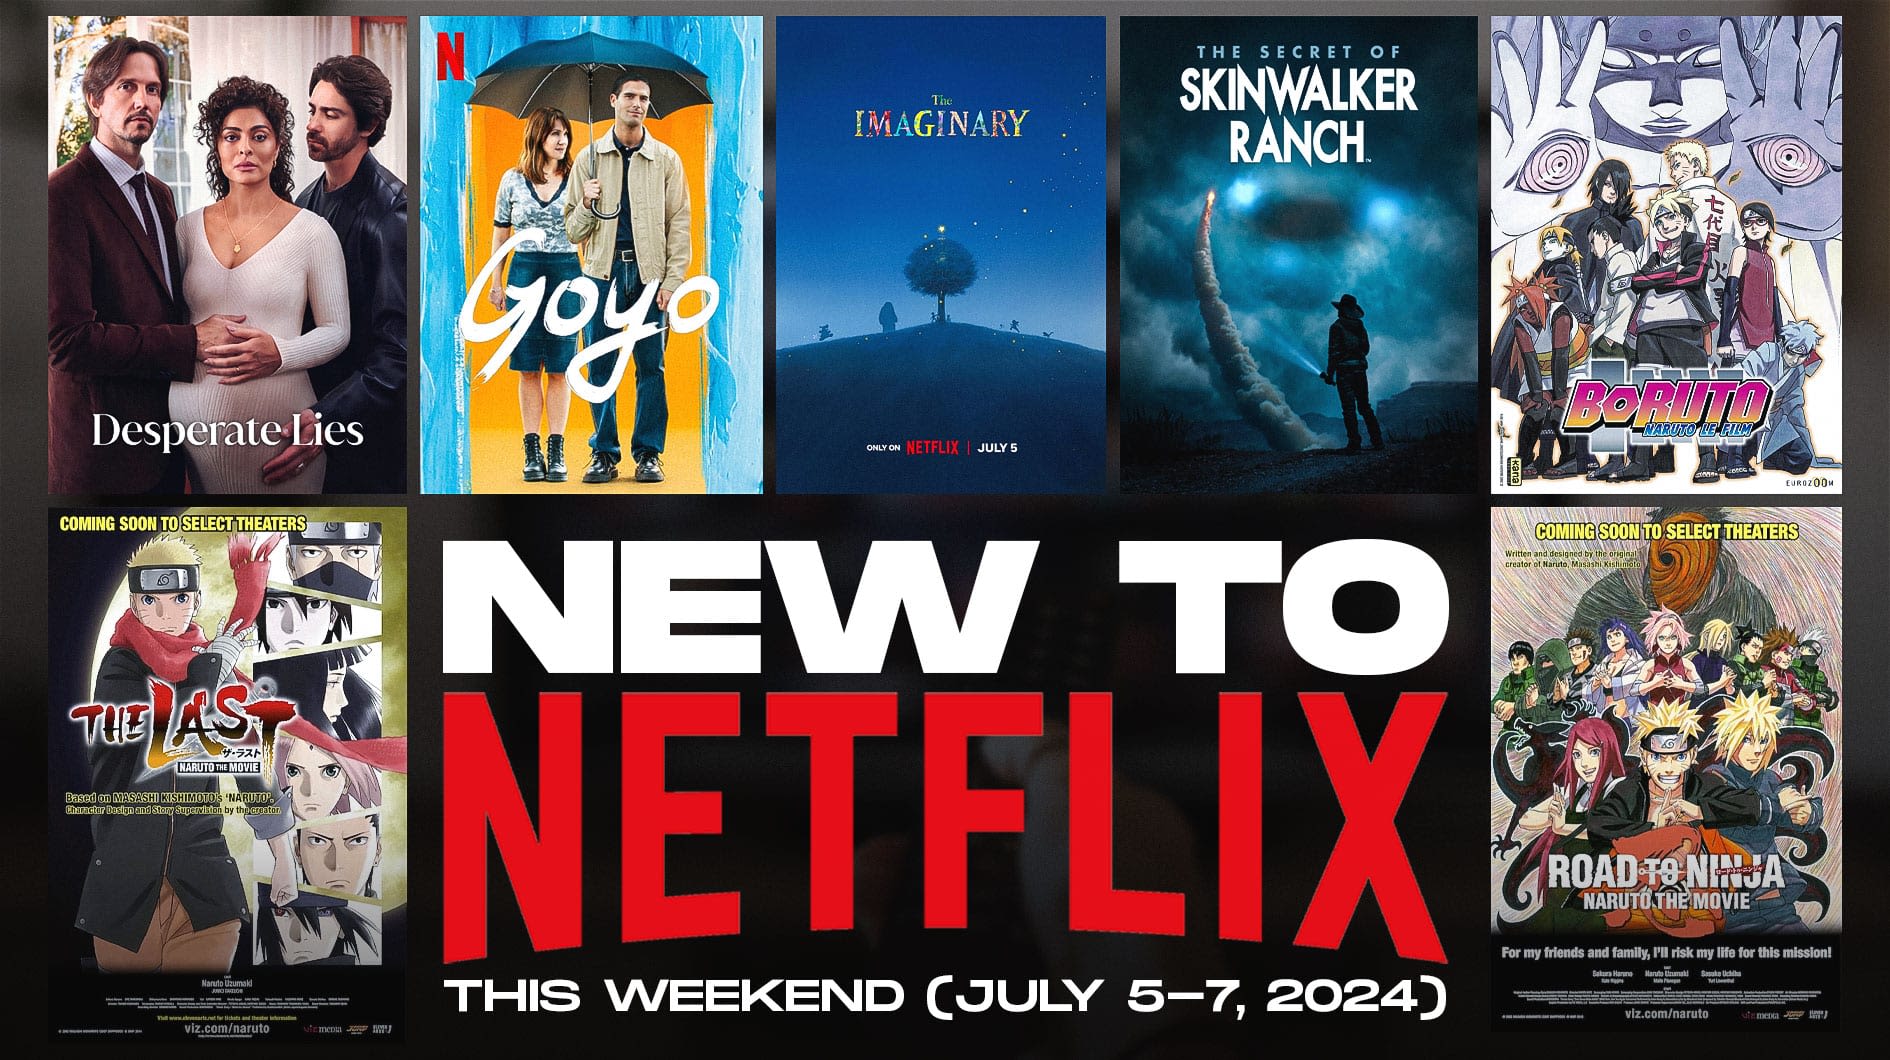 New to Netflix this Weekend (July 5-7, 2024)